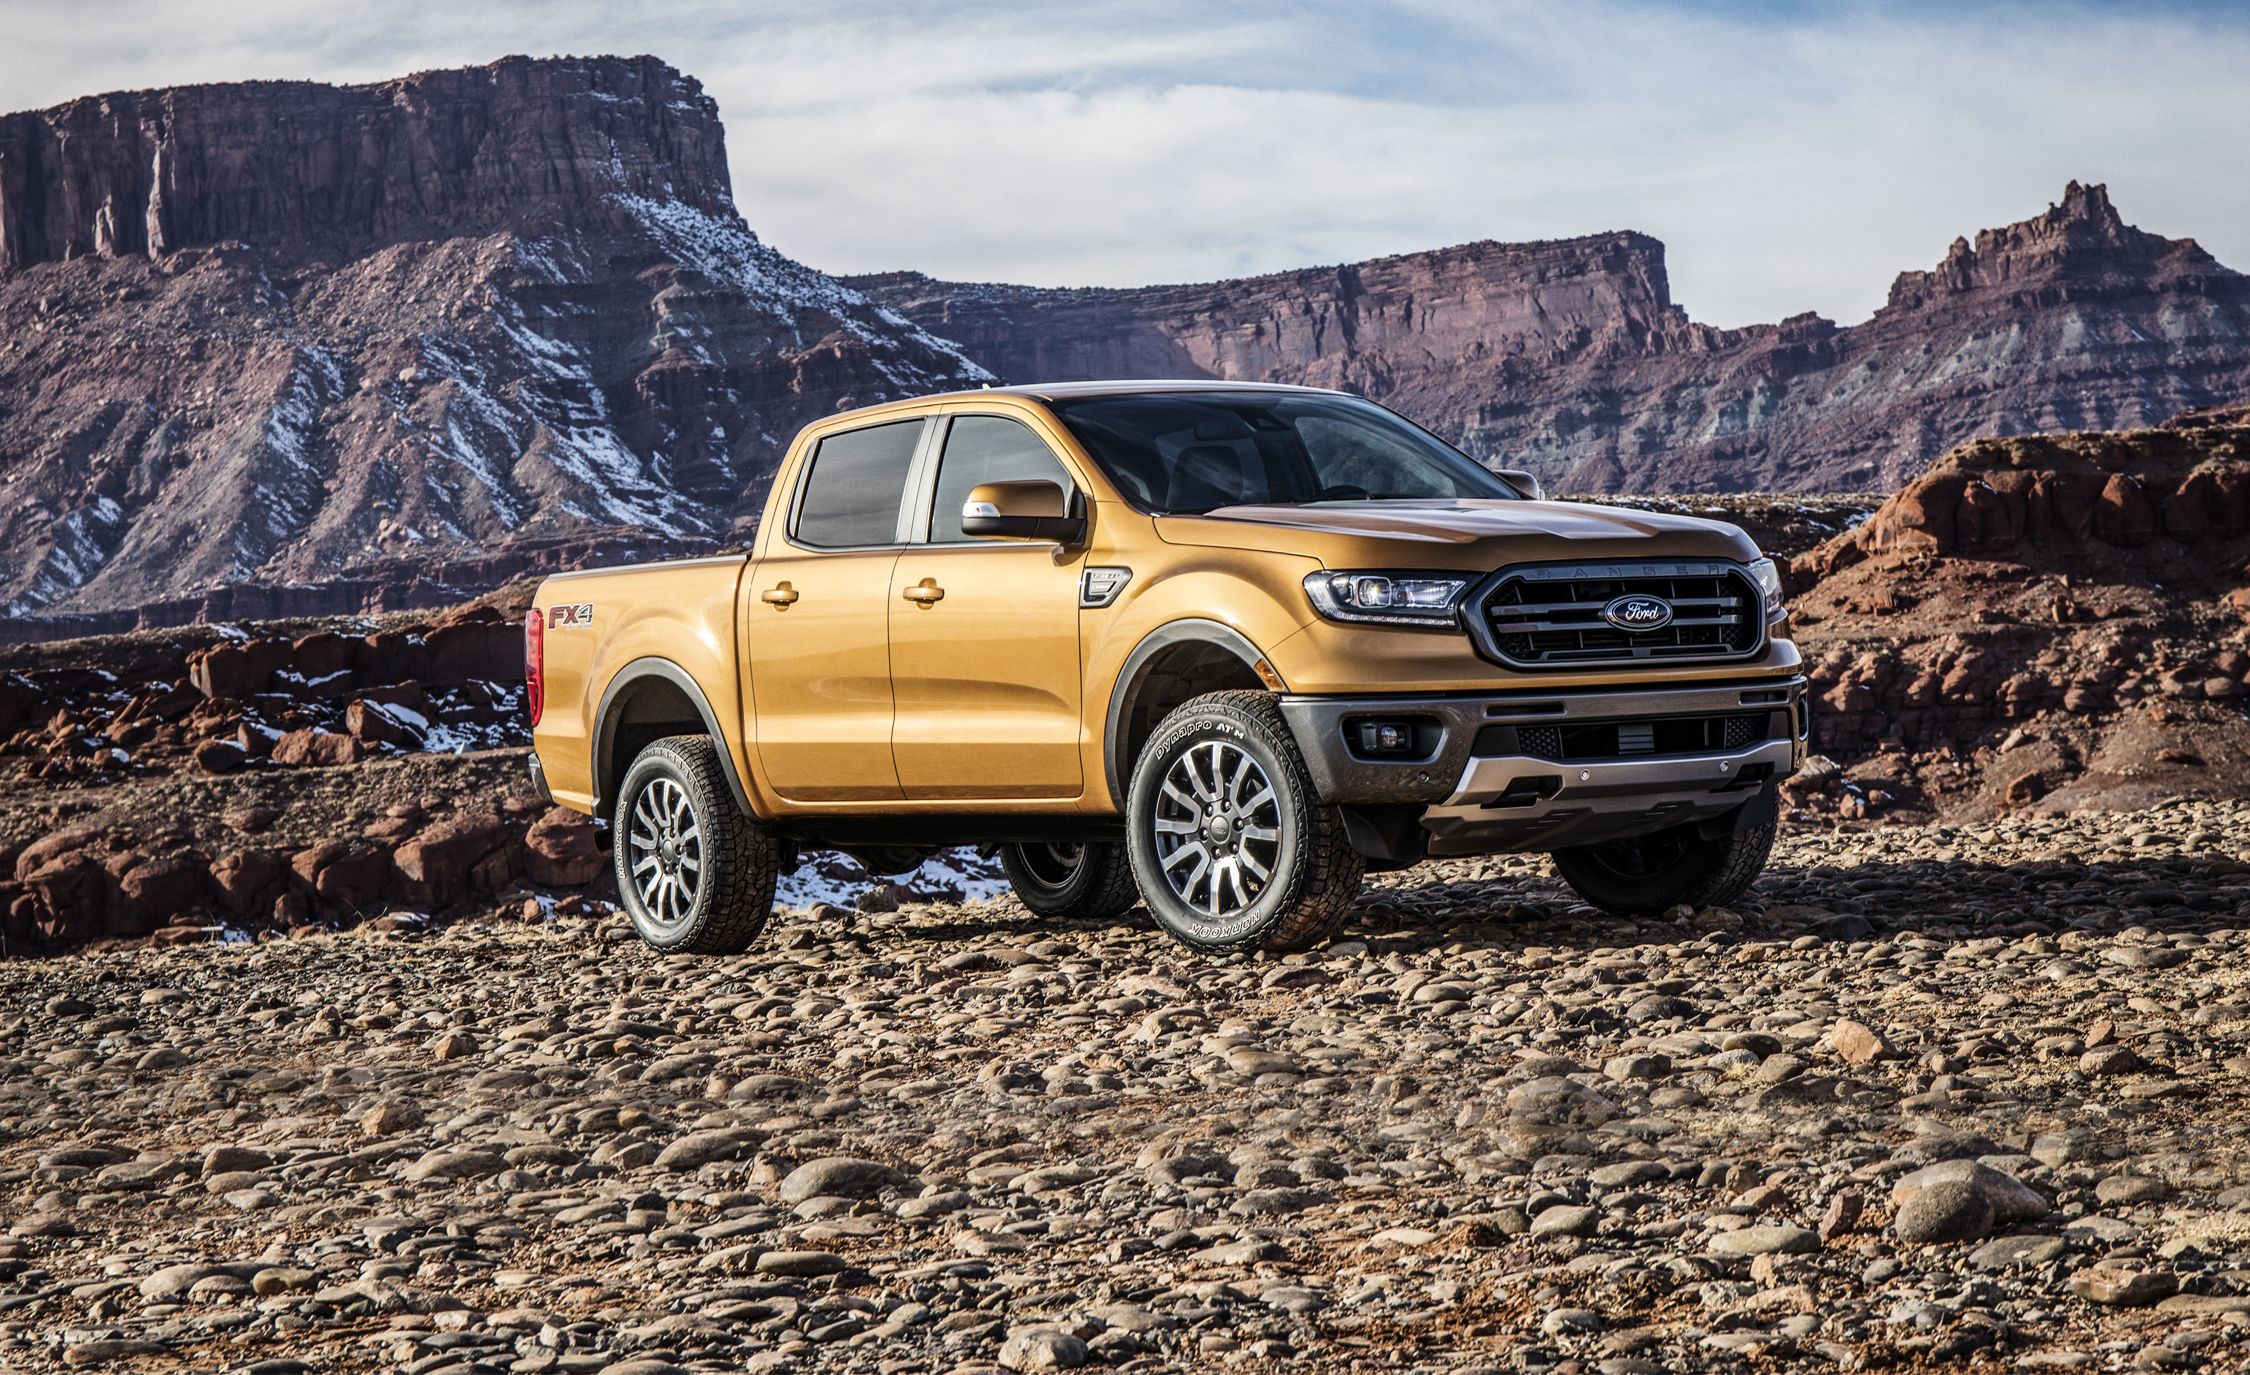 2019 Ford Ranger Mid Size Pickup Full Specs Pricing And Info